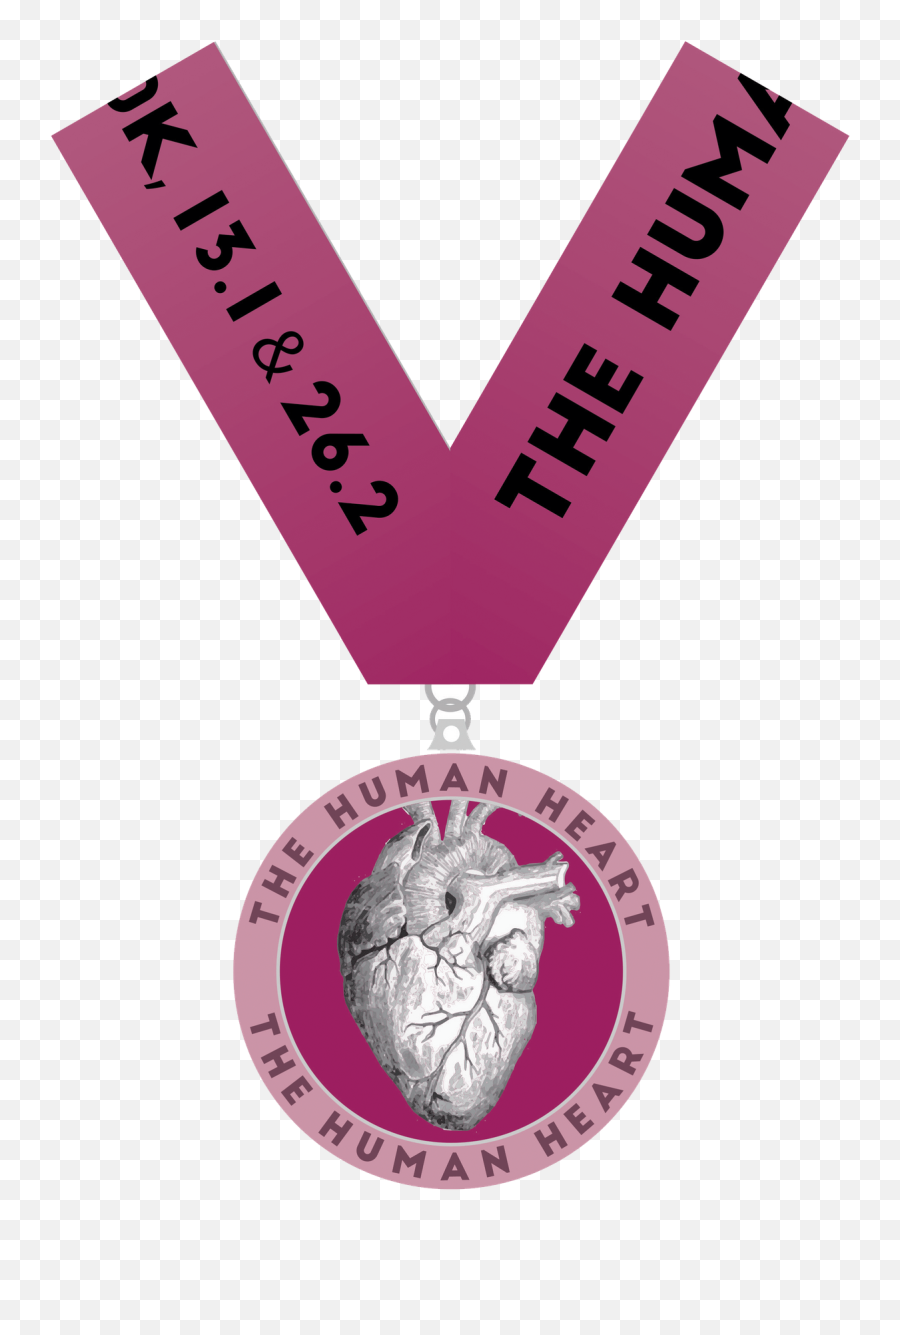 173 Races Events In New Orleans Today - Human Heart Emoji,Silver Medal Emoji